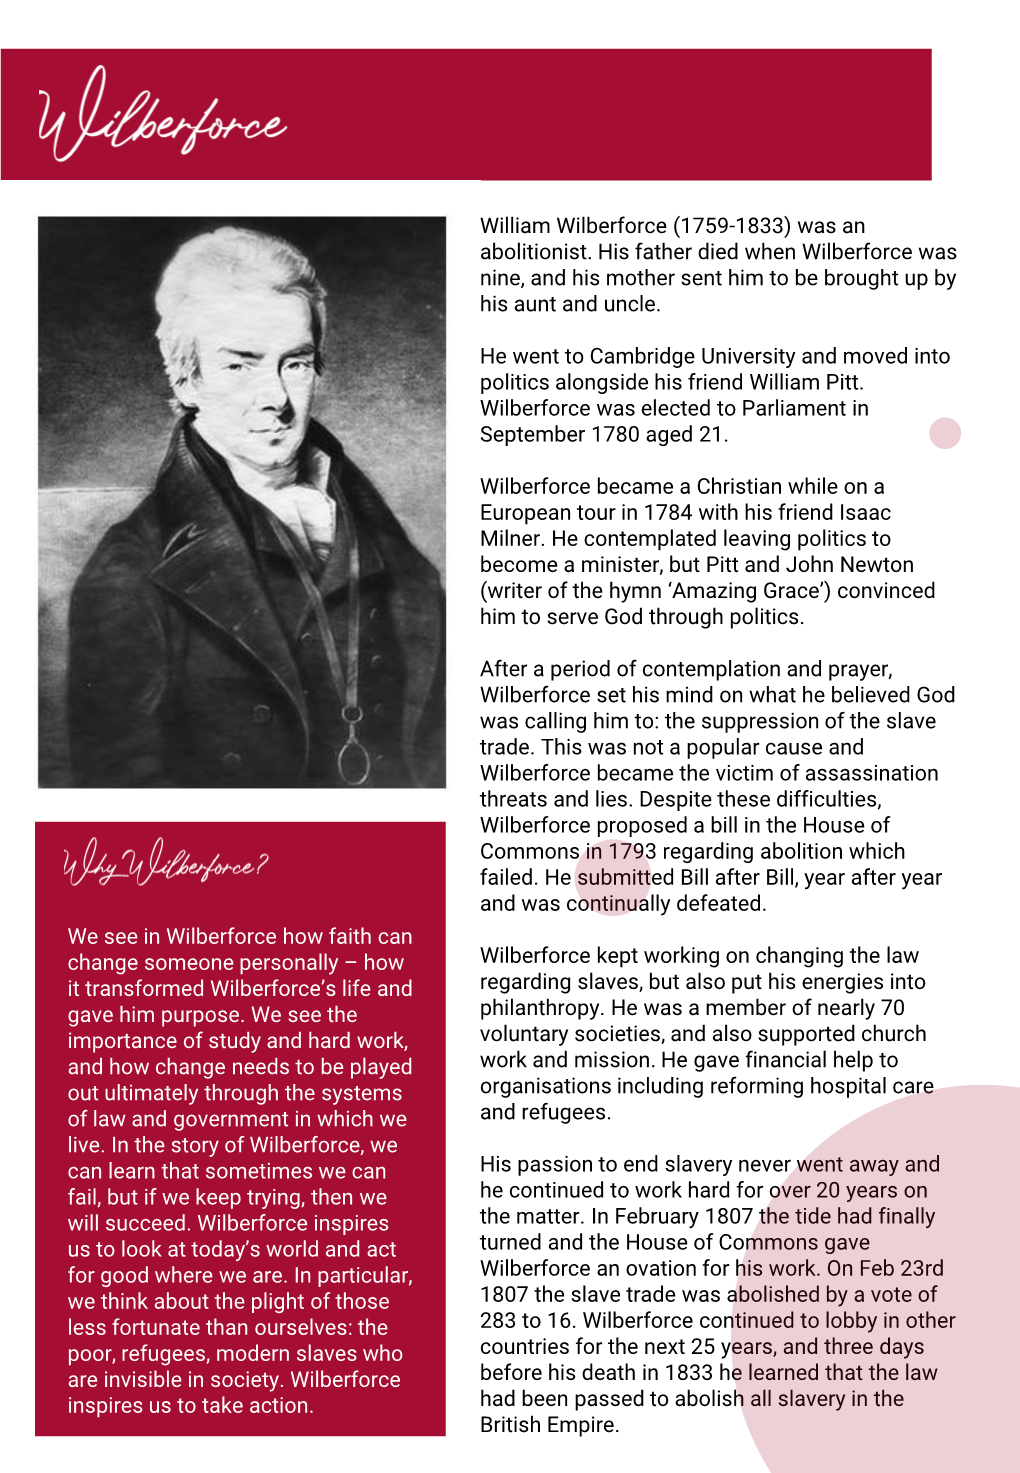 William Wilberforce (1759-1833) Was an Abolitionist. His Father Died When Wilberforce Was Nine, and His Mother Sent Him to Be Brought up by His Aunt and Uncle